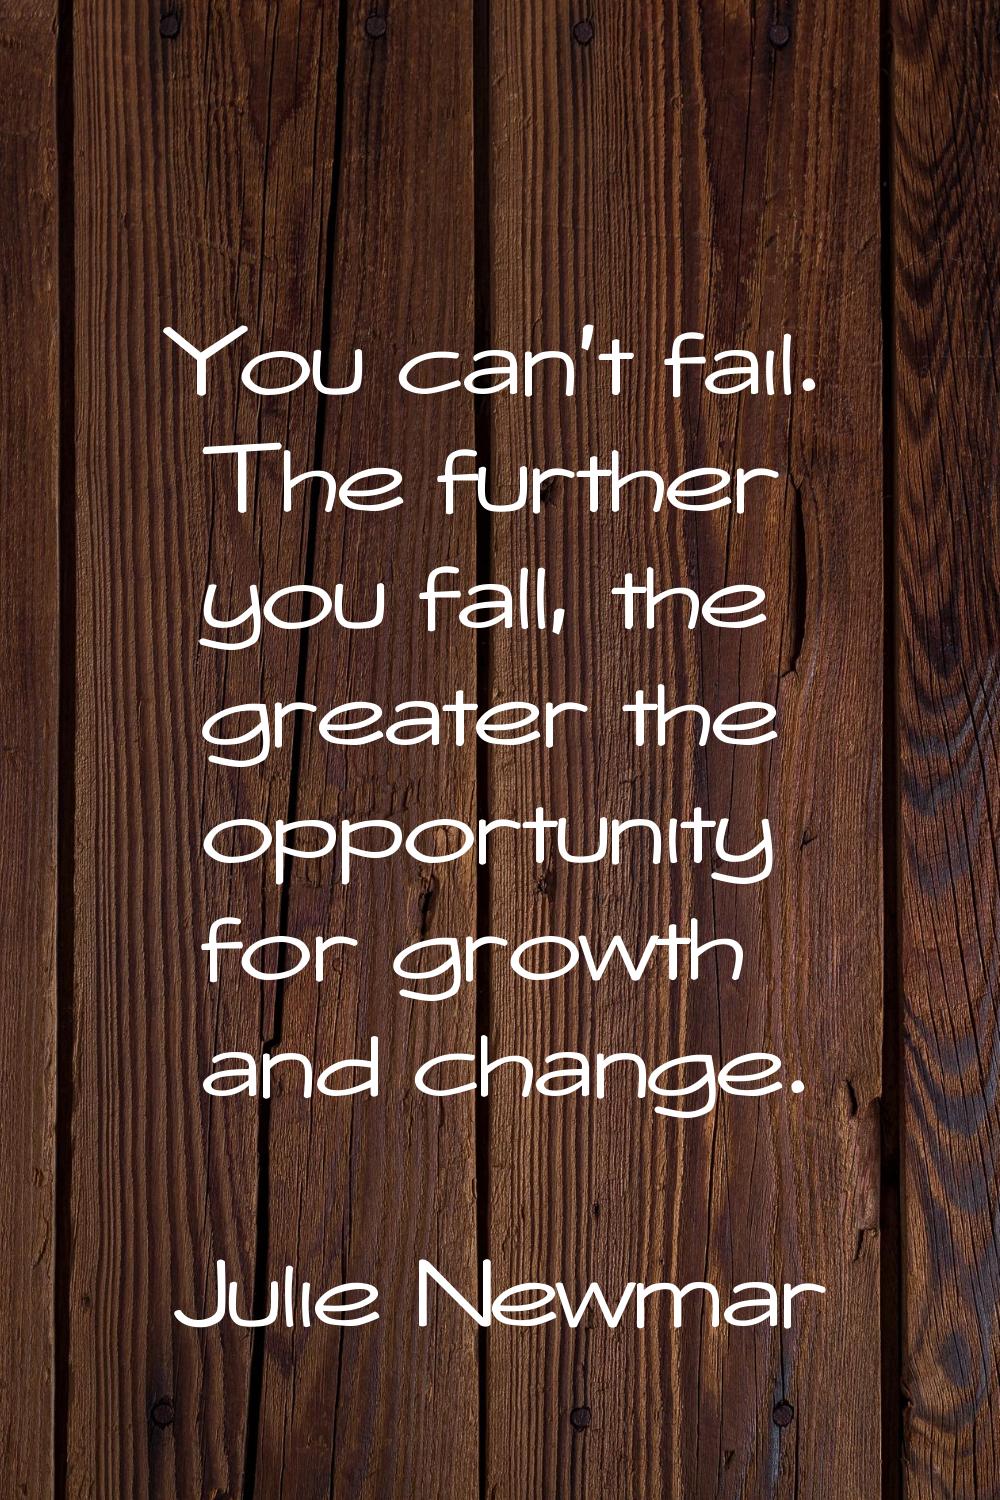 You can't fail. The further you fall, the greater the opportunity for growth and change.